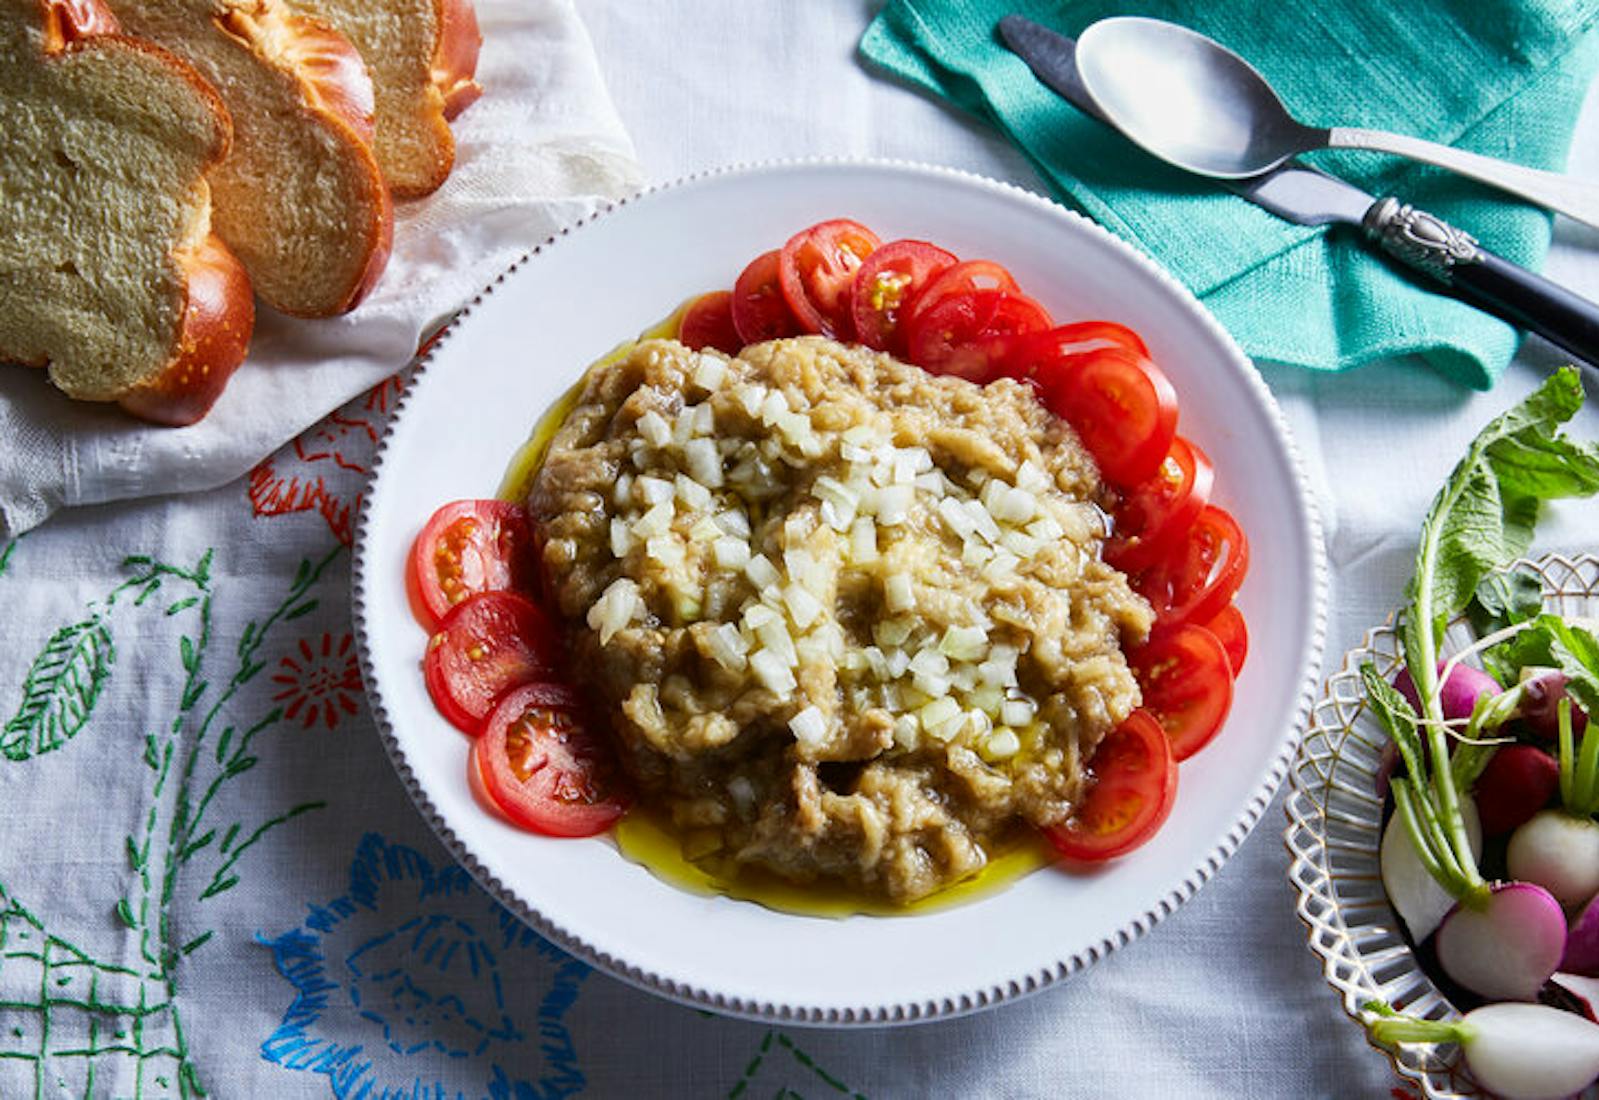 Eggplant salad with raw onions and tomatoes alongside sliced challah and bowl of halved radishes.